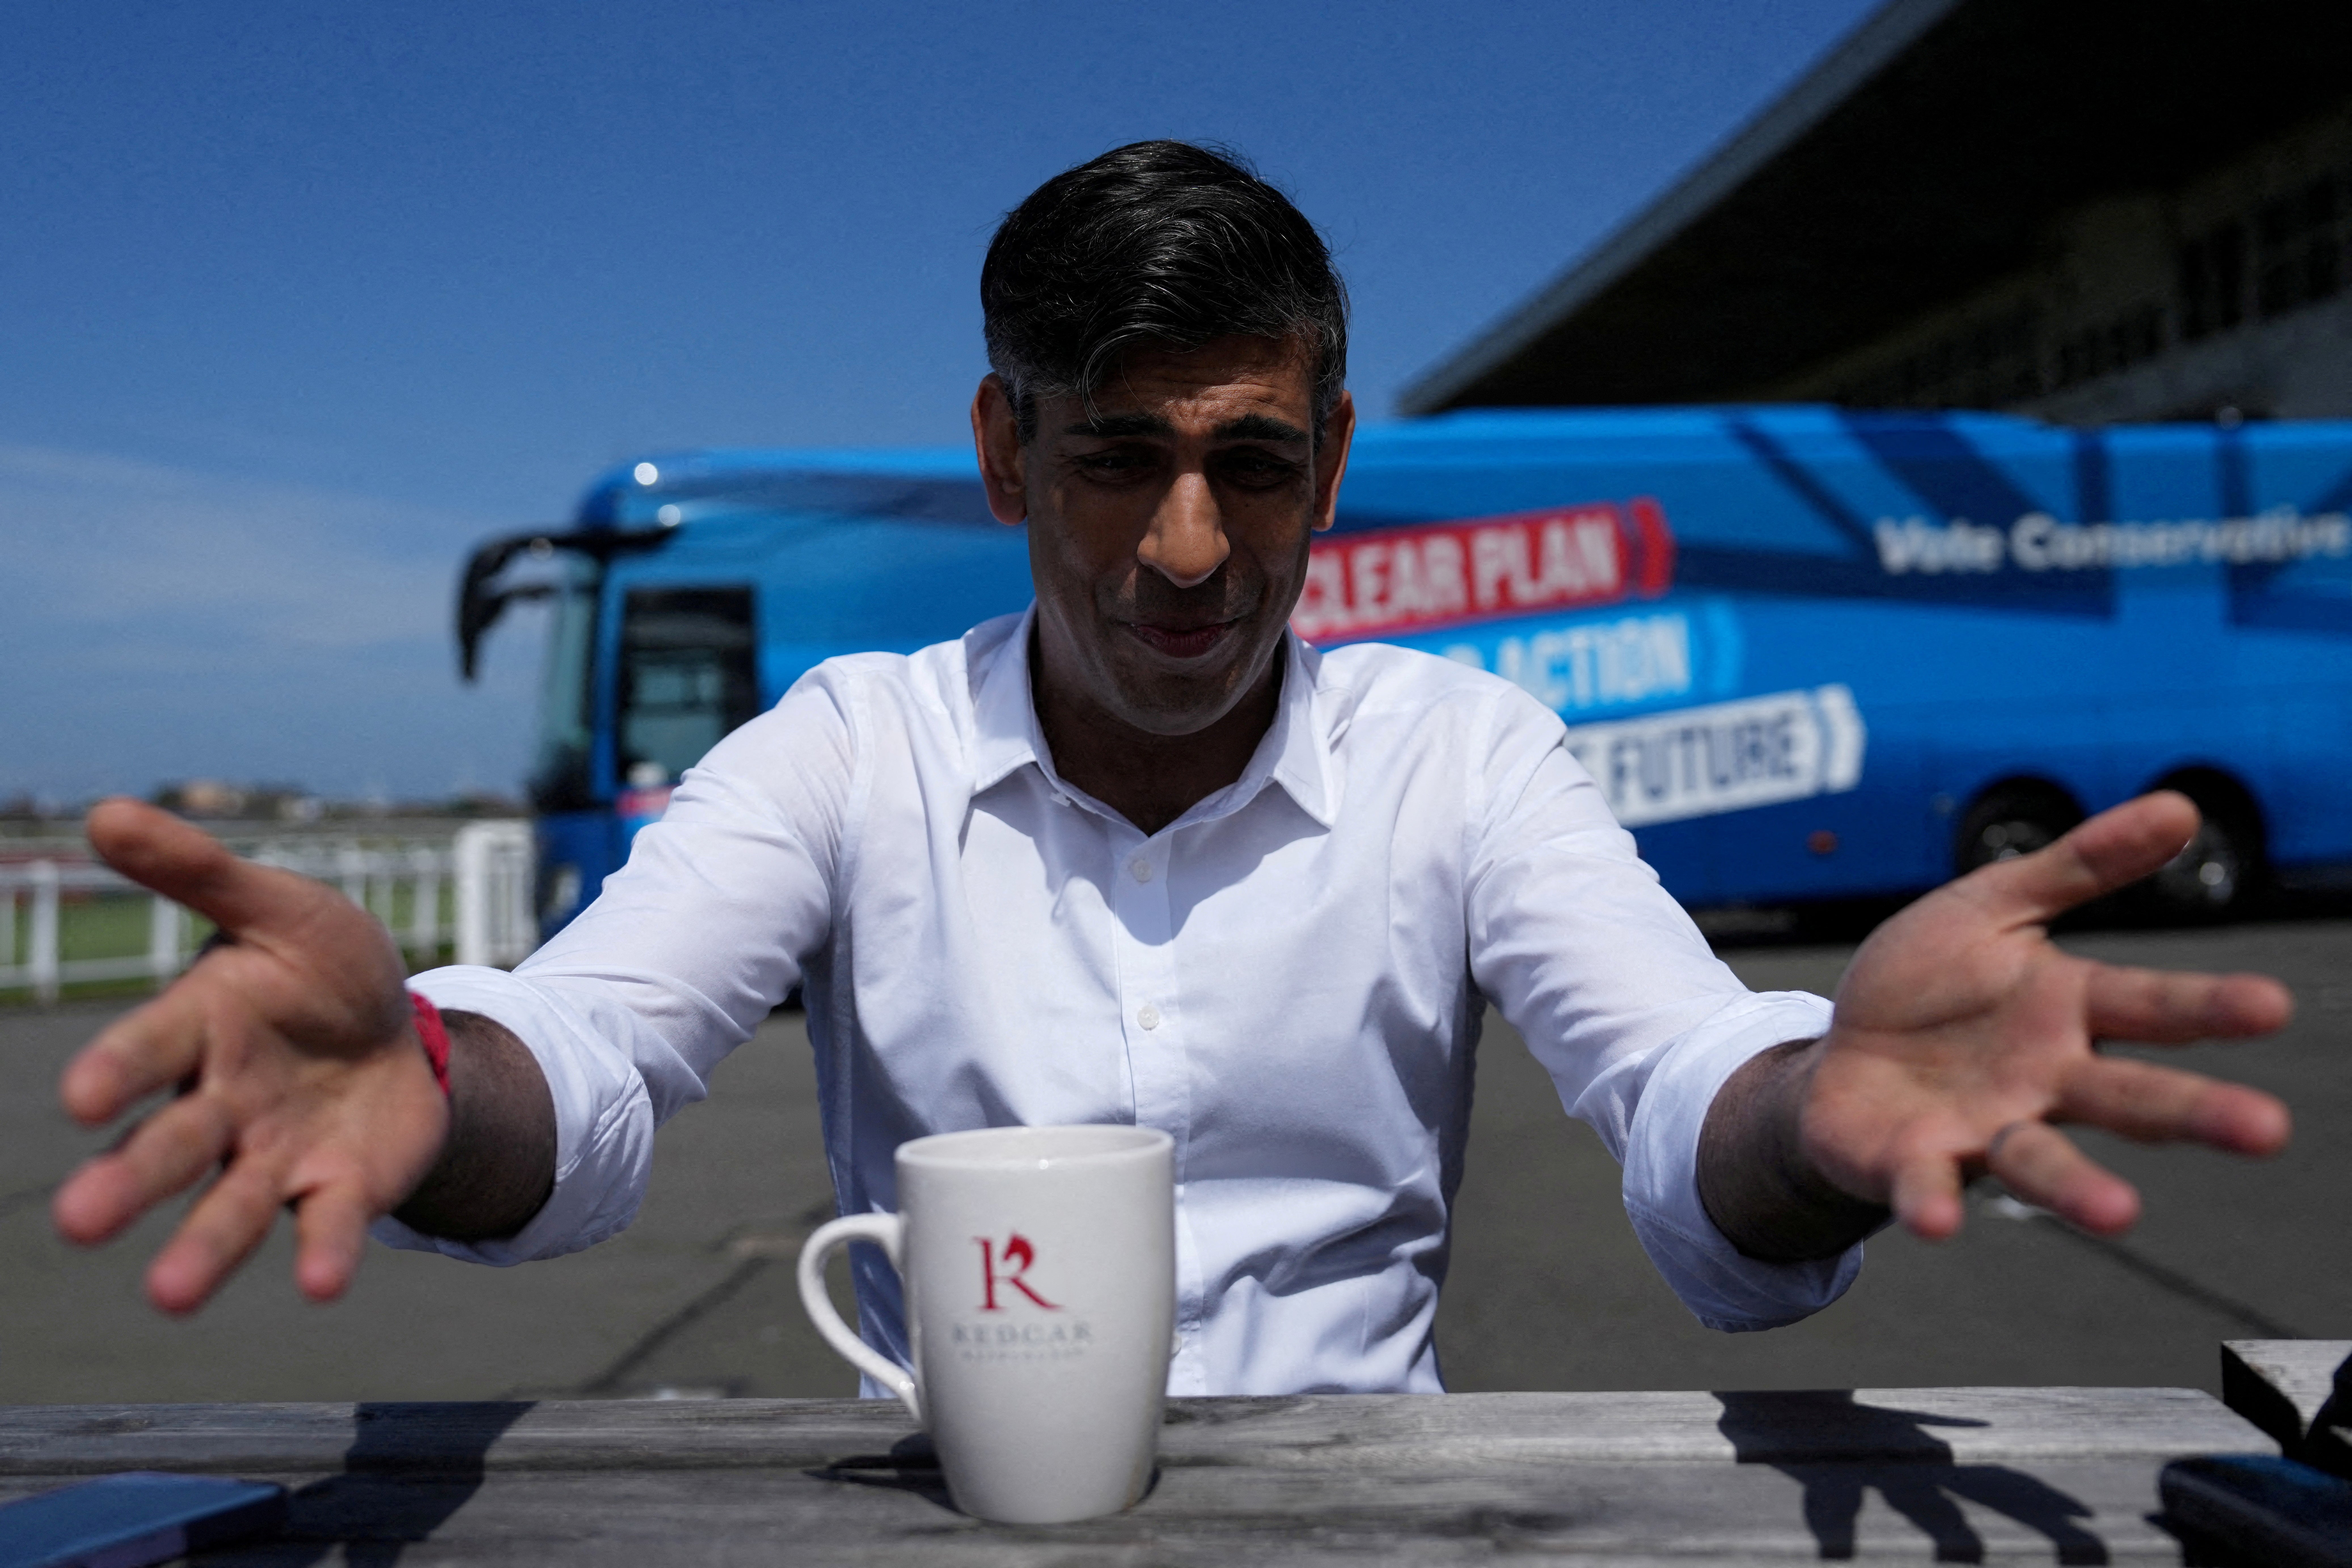 Rishi Sunak could be leading his party to its worst ever result